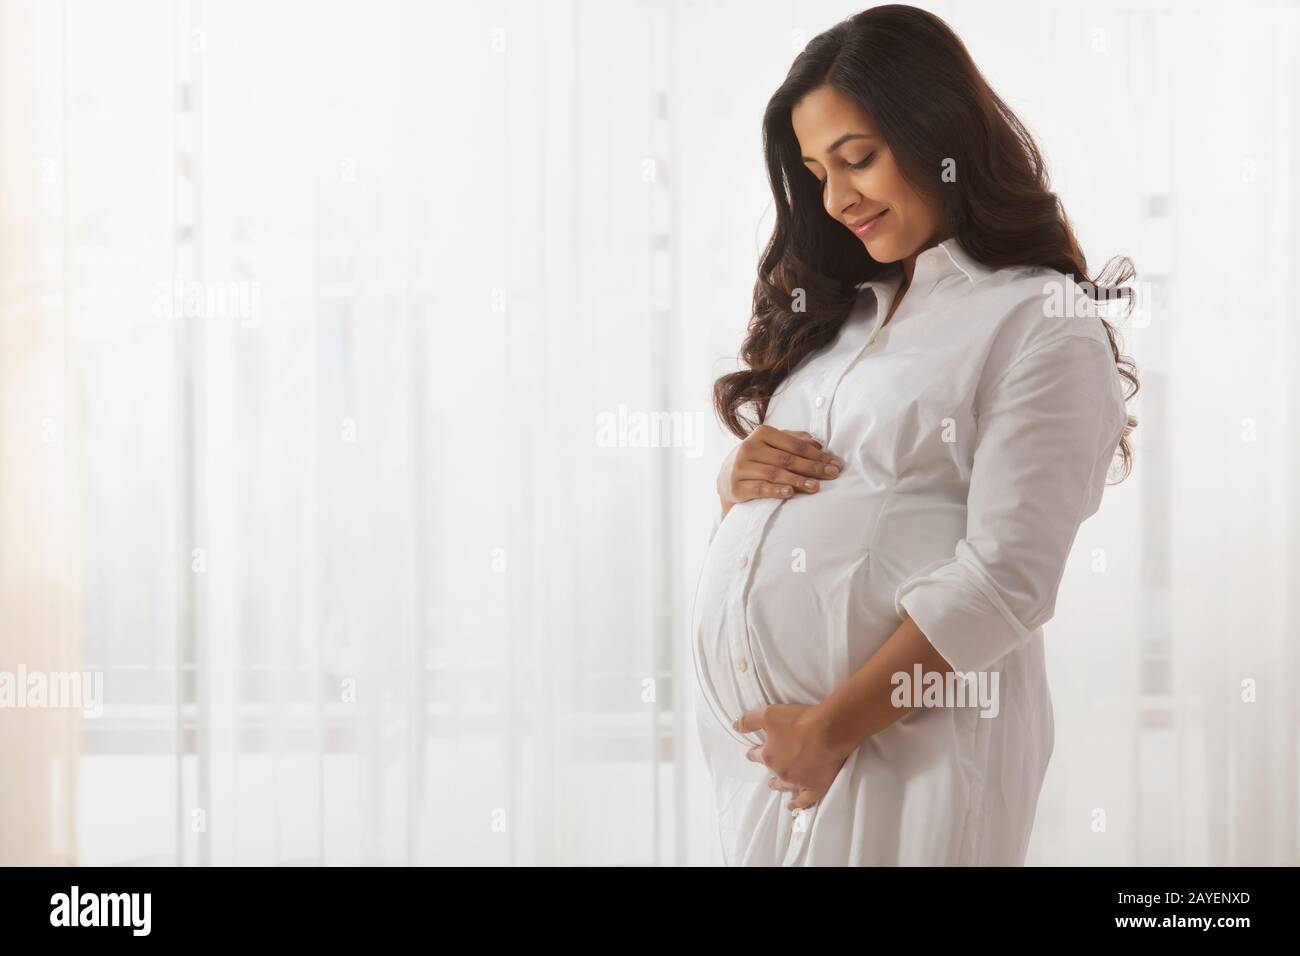 Pregnant woman looking at her baby bump. Stock Photo